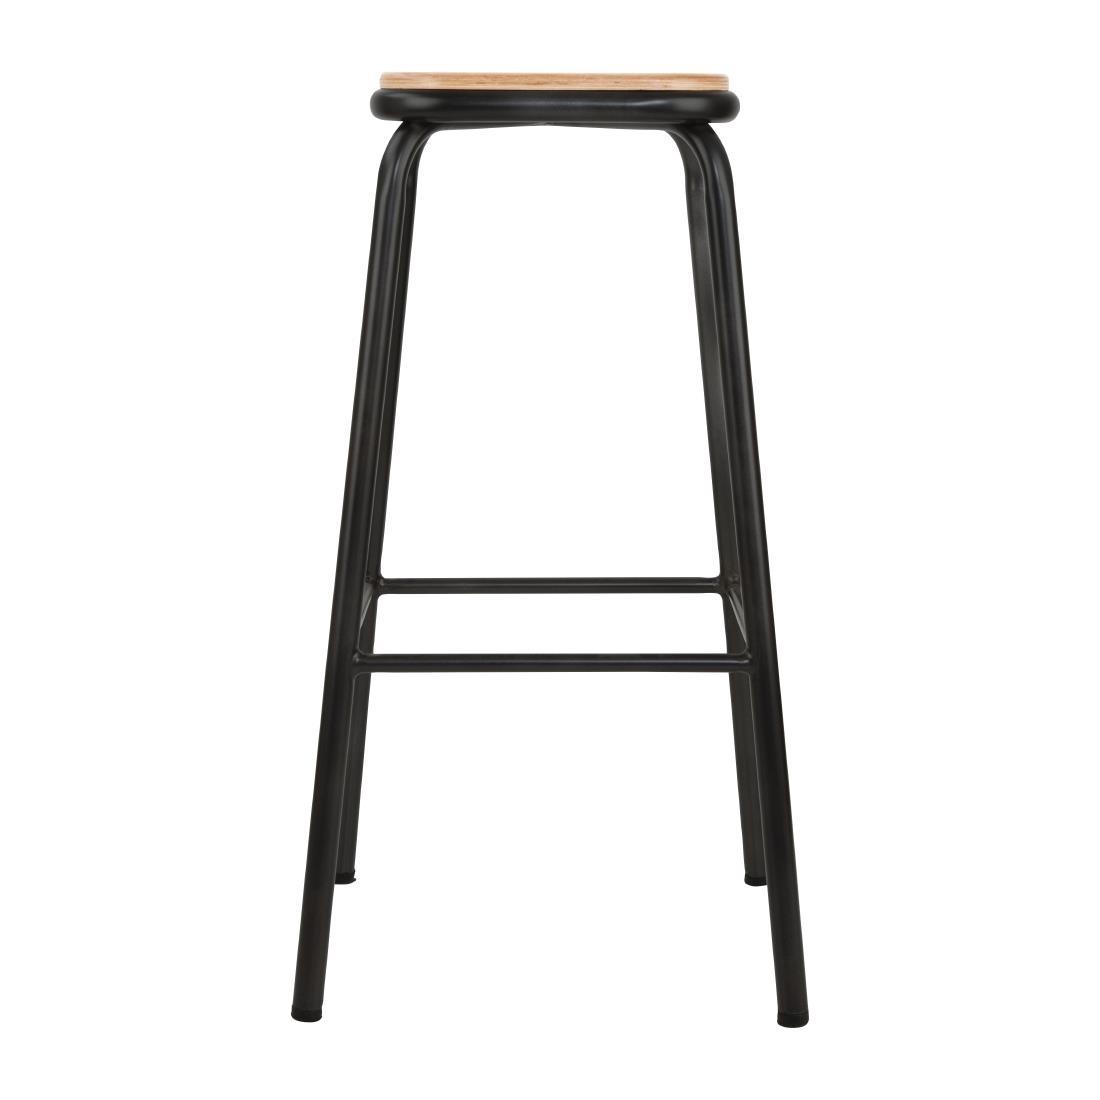 Bolero Cantina High Stools with Wooden Seat Pad Black (Pack of 4) - DE482  - 4